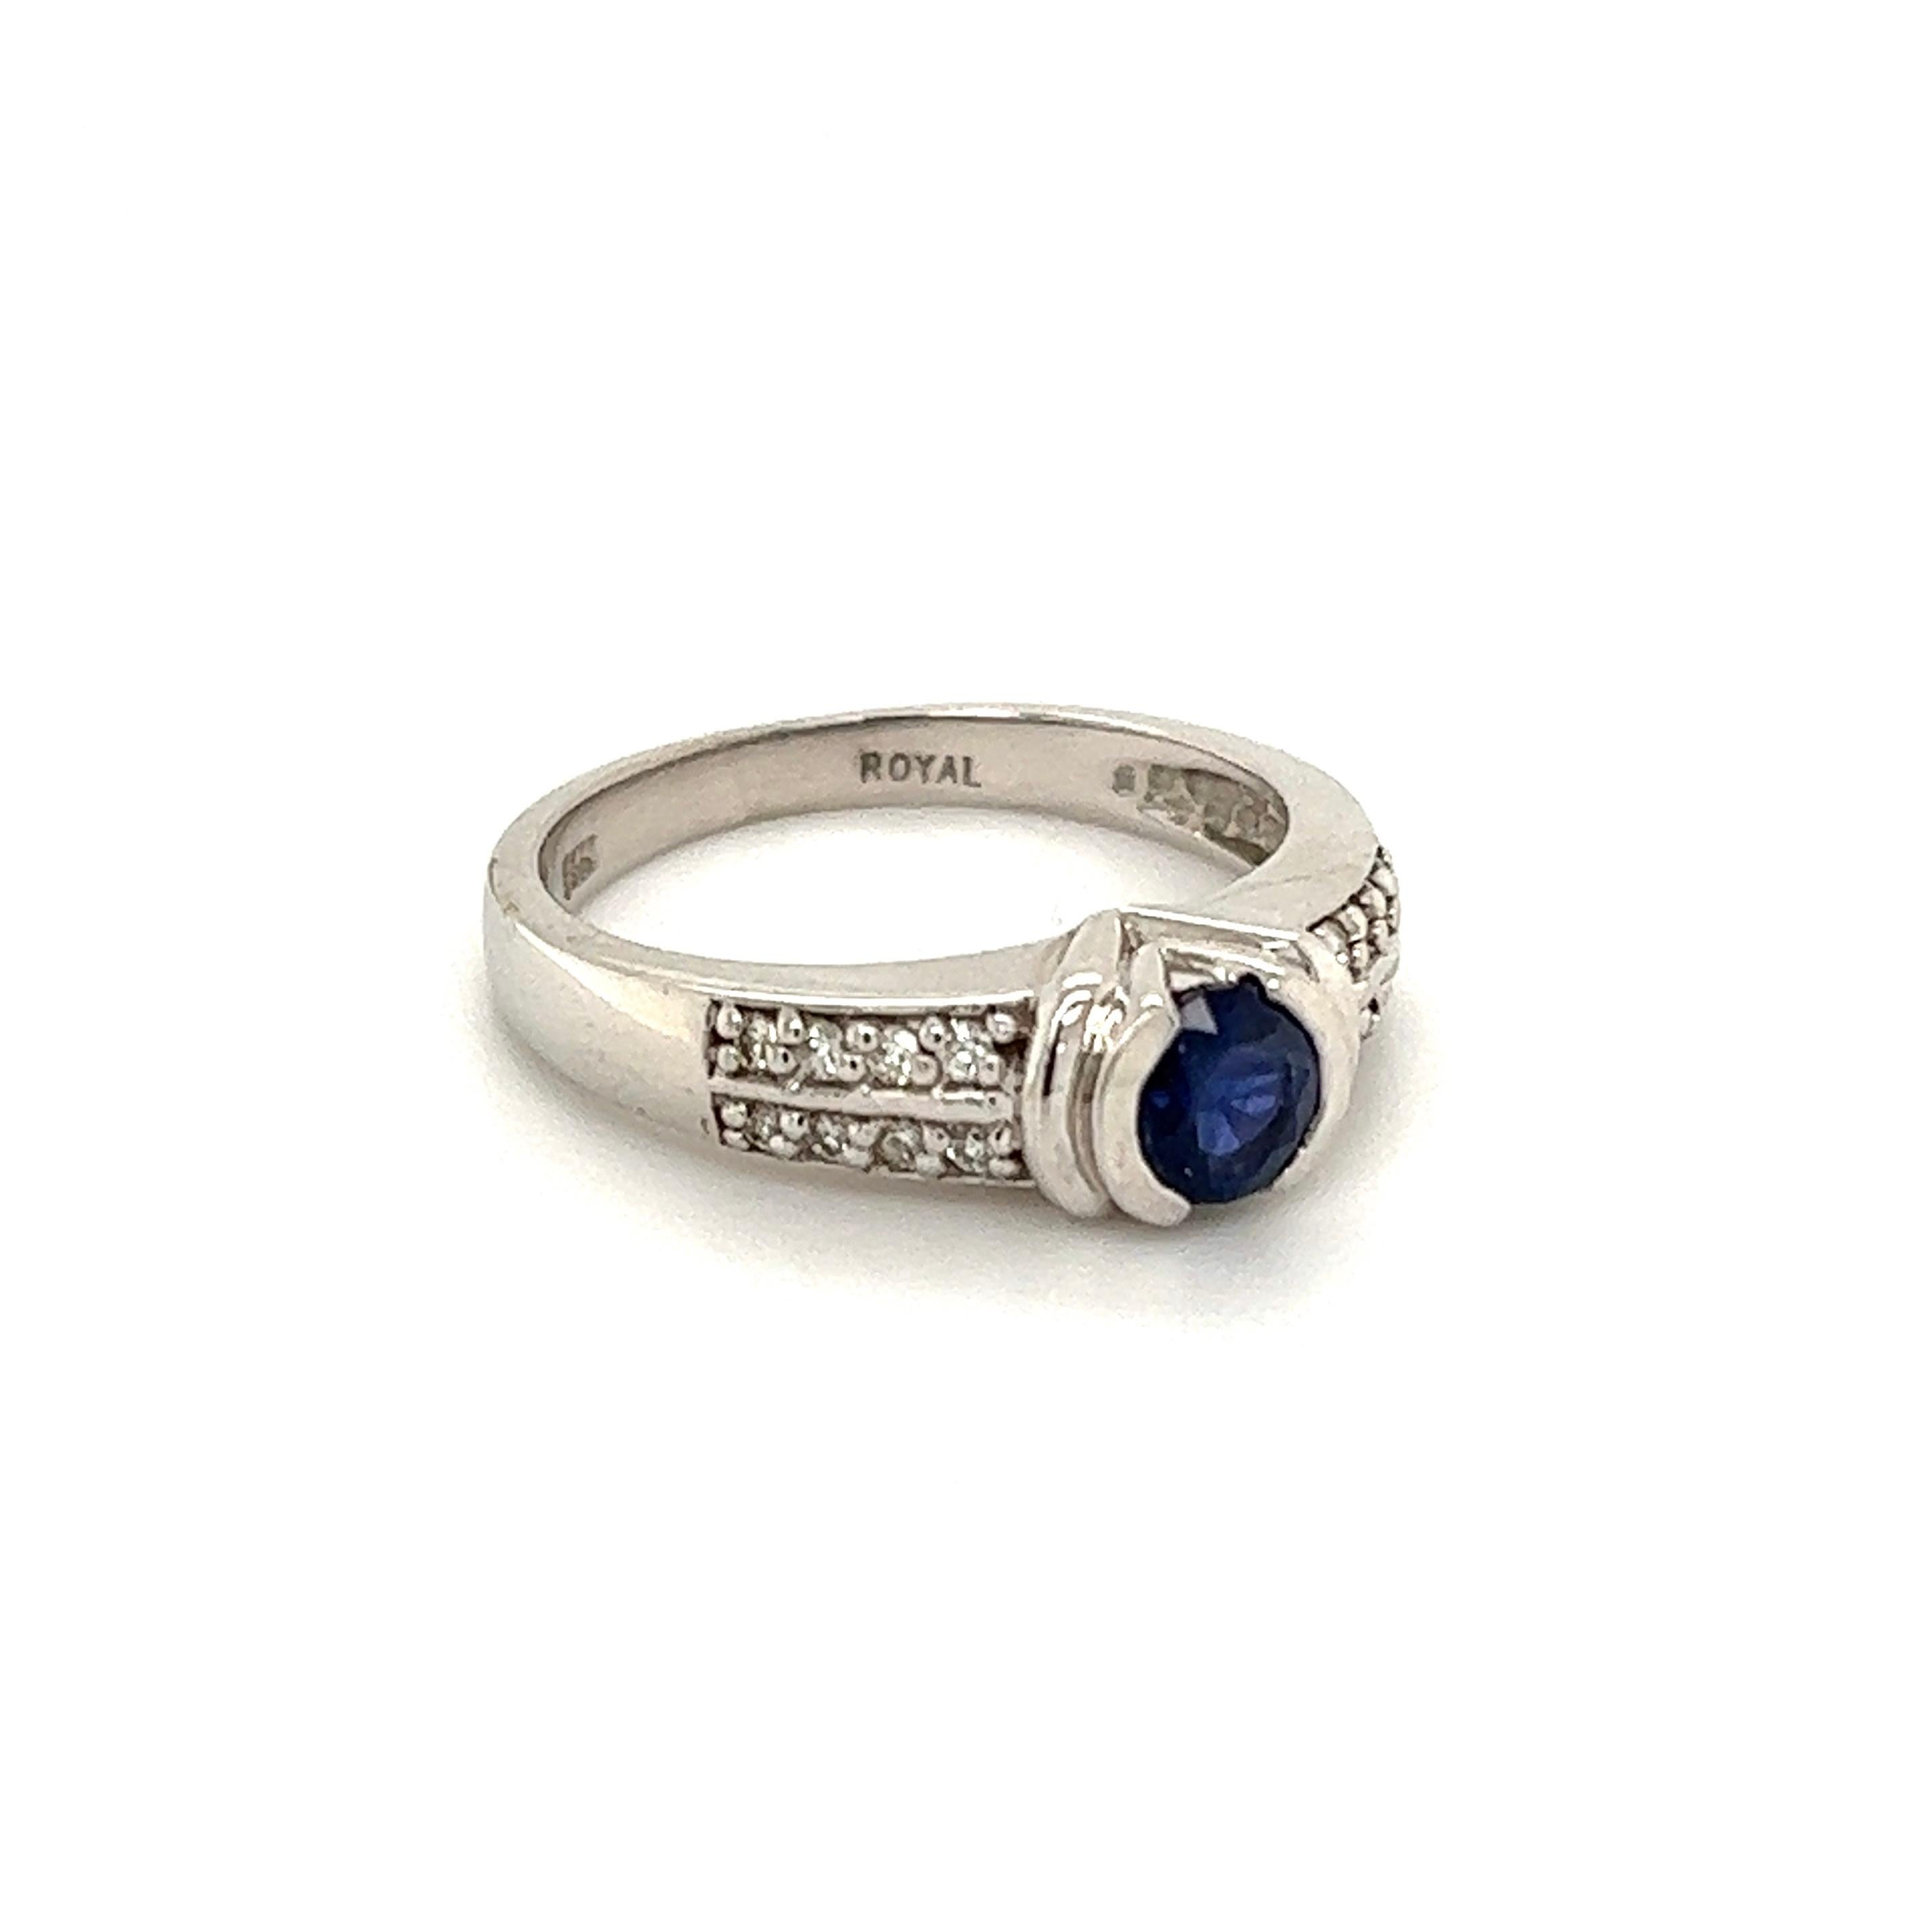 Simply Beautiful! Finely Detailed Blue Sapphire and Diamond Gold Ring. Center securely nestled with a Hand set 0.60 Carat Round Sapphire, accented by Diamonds, approx. 0.10tcw. Hand crafted 14K White Gold mounting. Marked: 14K